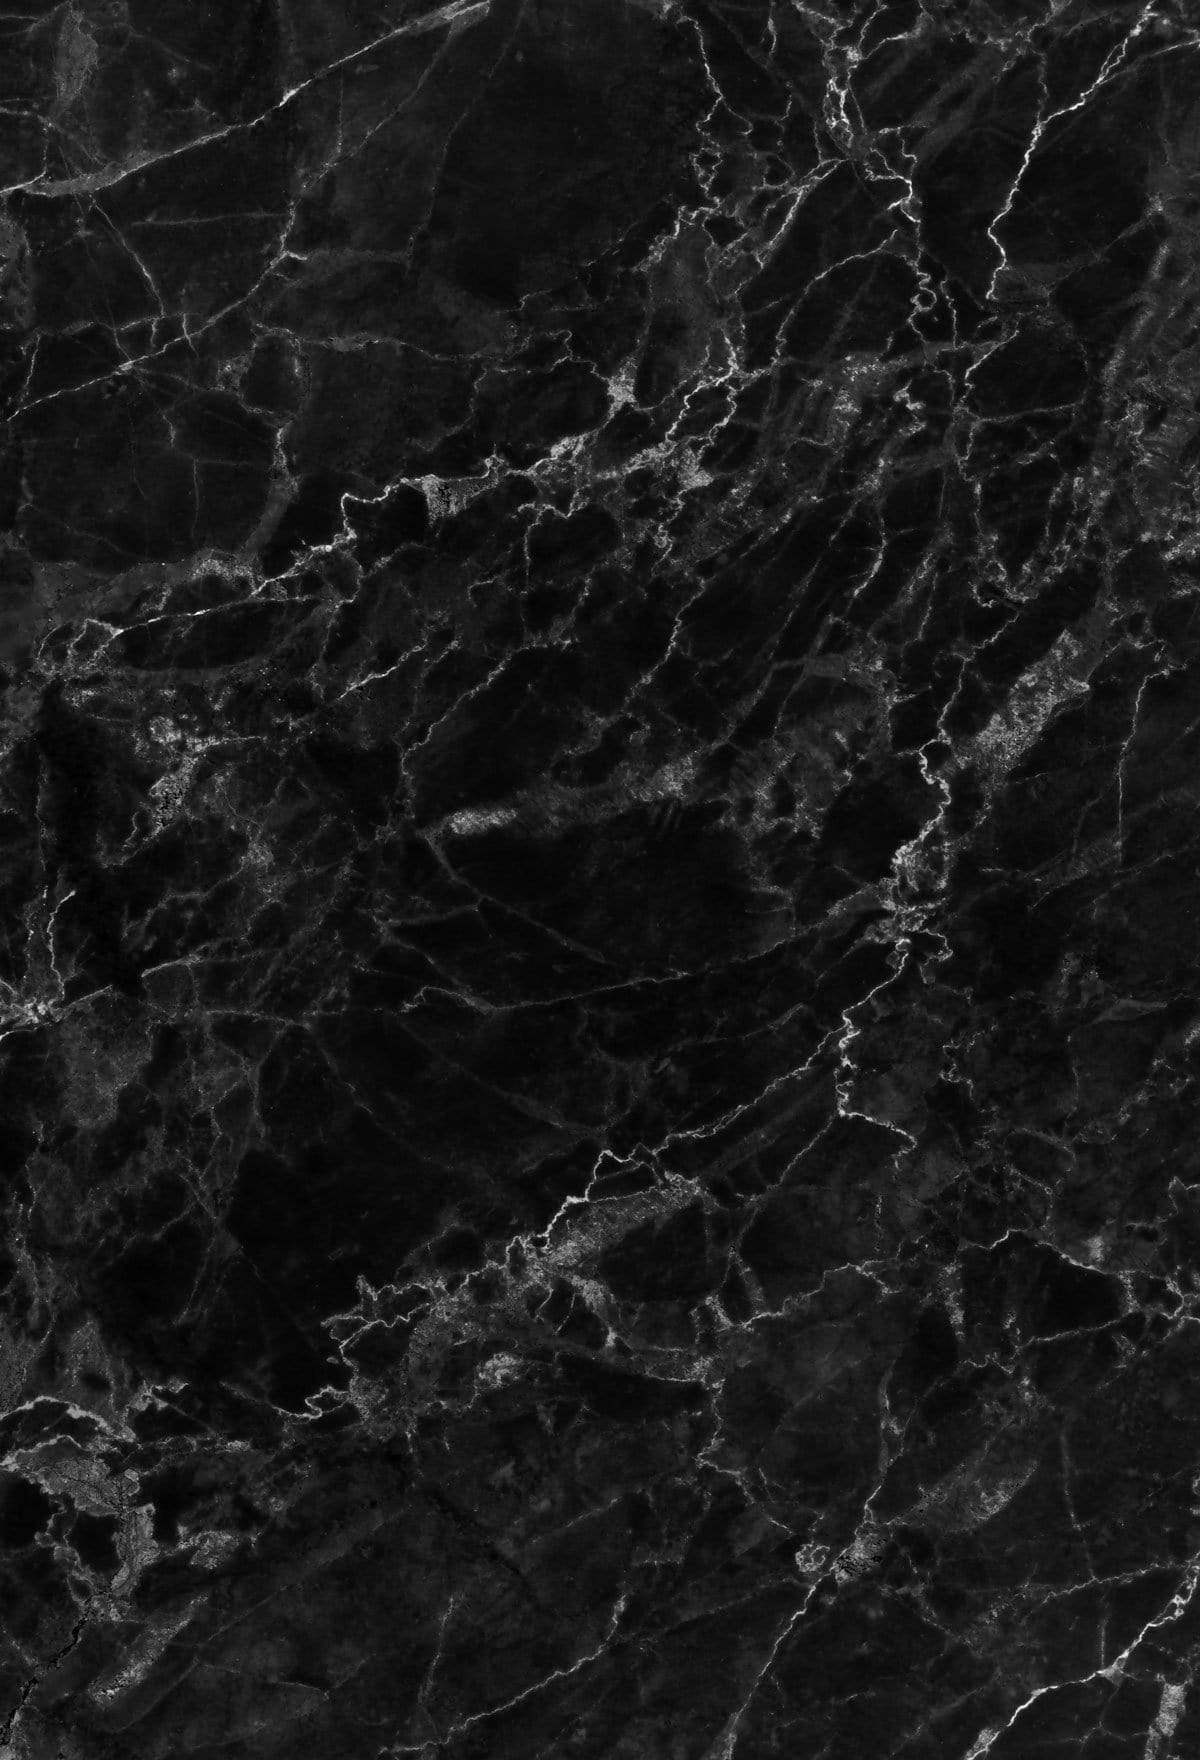 Black Marble Textures Backdrop for Photography GA-30